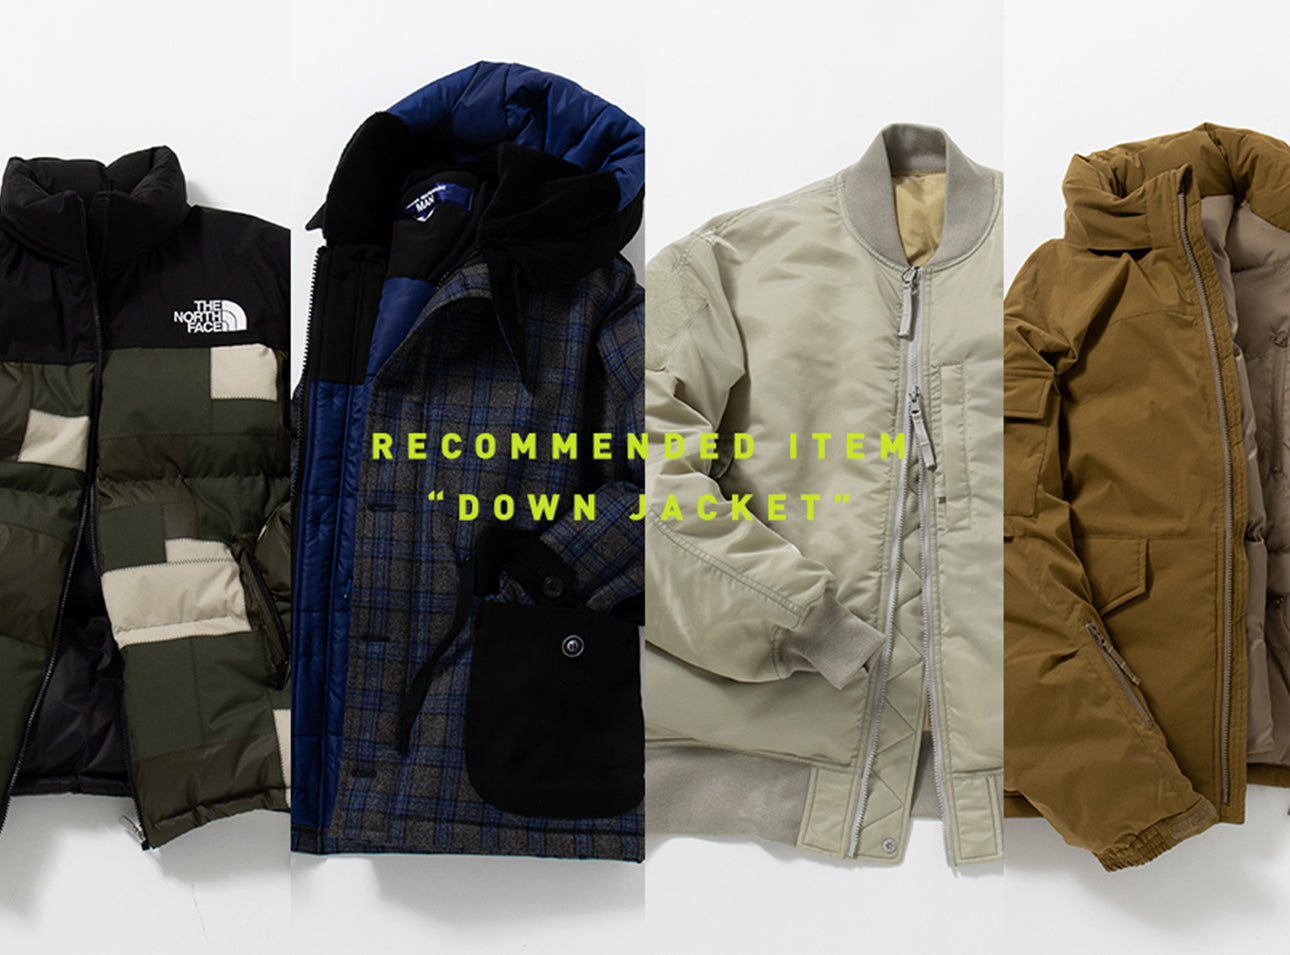 RECOMMENDED ITEM “DOWN JACKET”